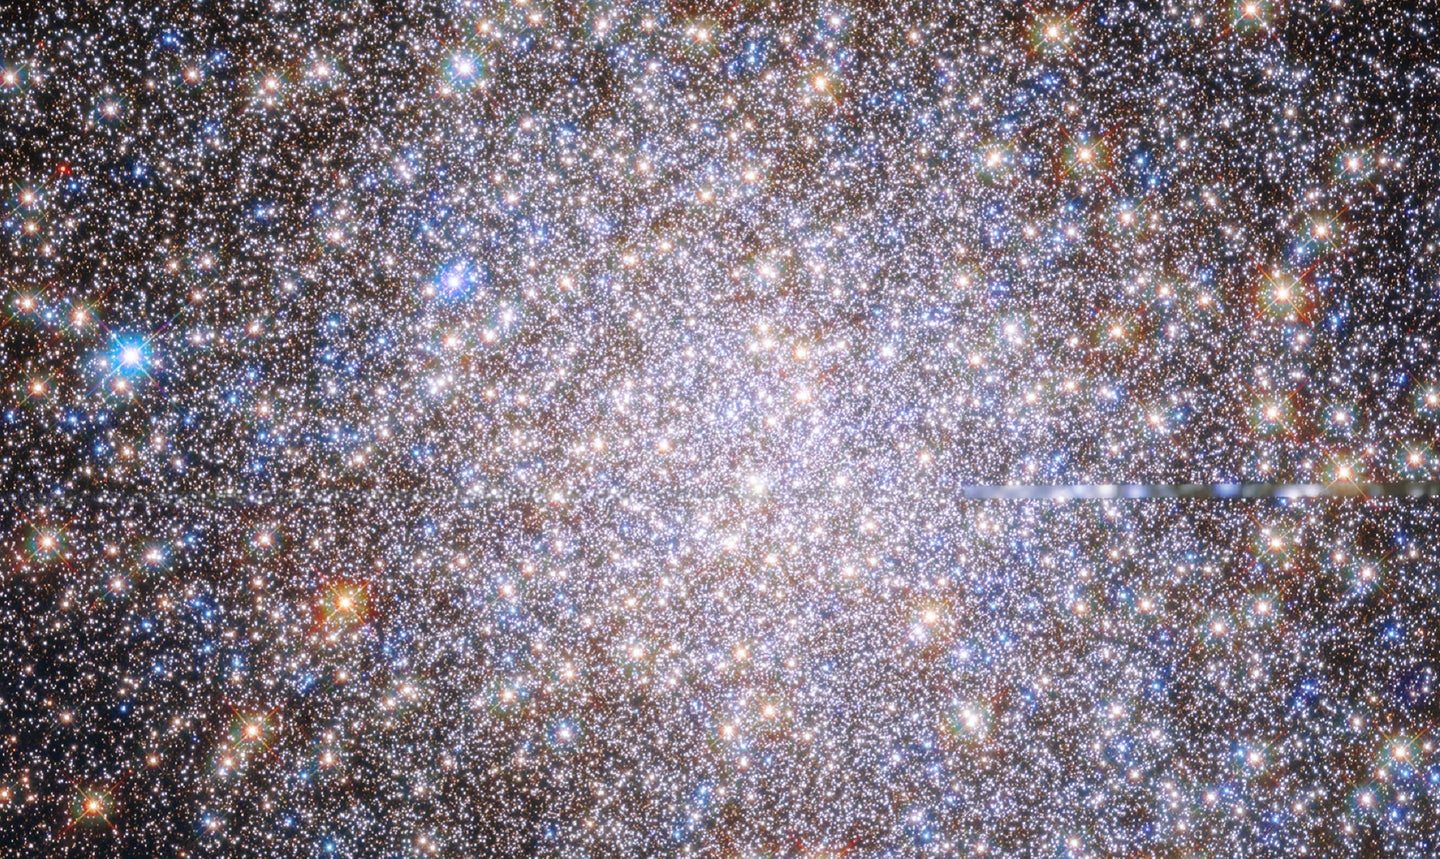 Colorful M19 star cluster in NASA Hubble Space Telescope image